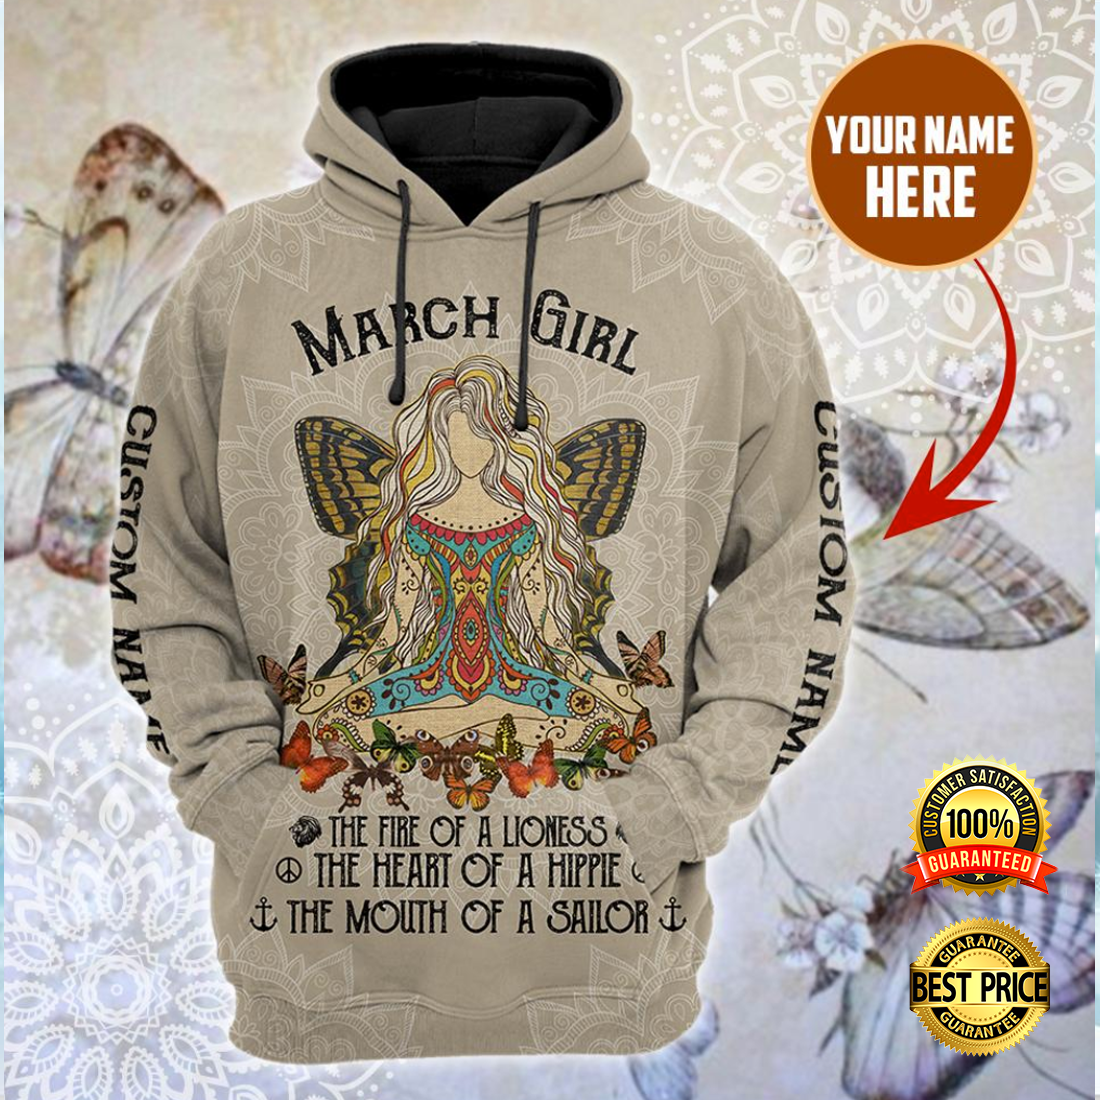 Personalized Namaste march girl all over printed 3D hoodie 4